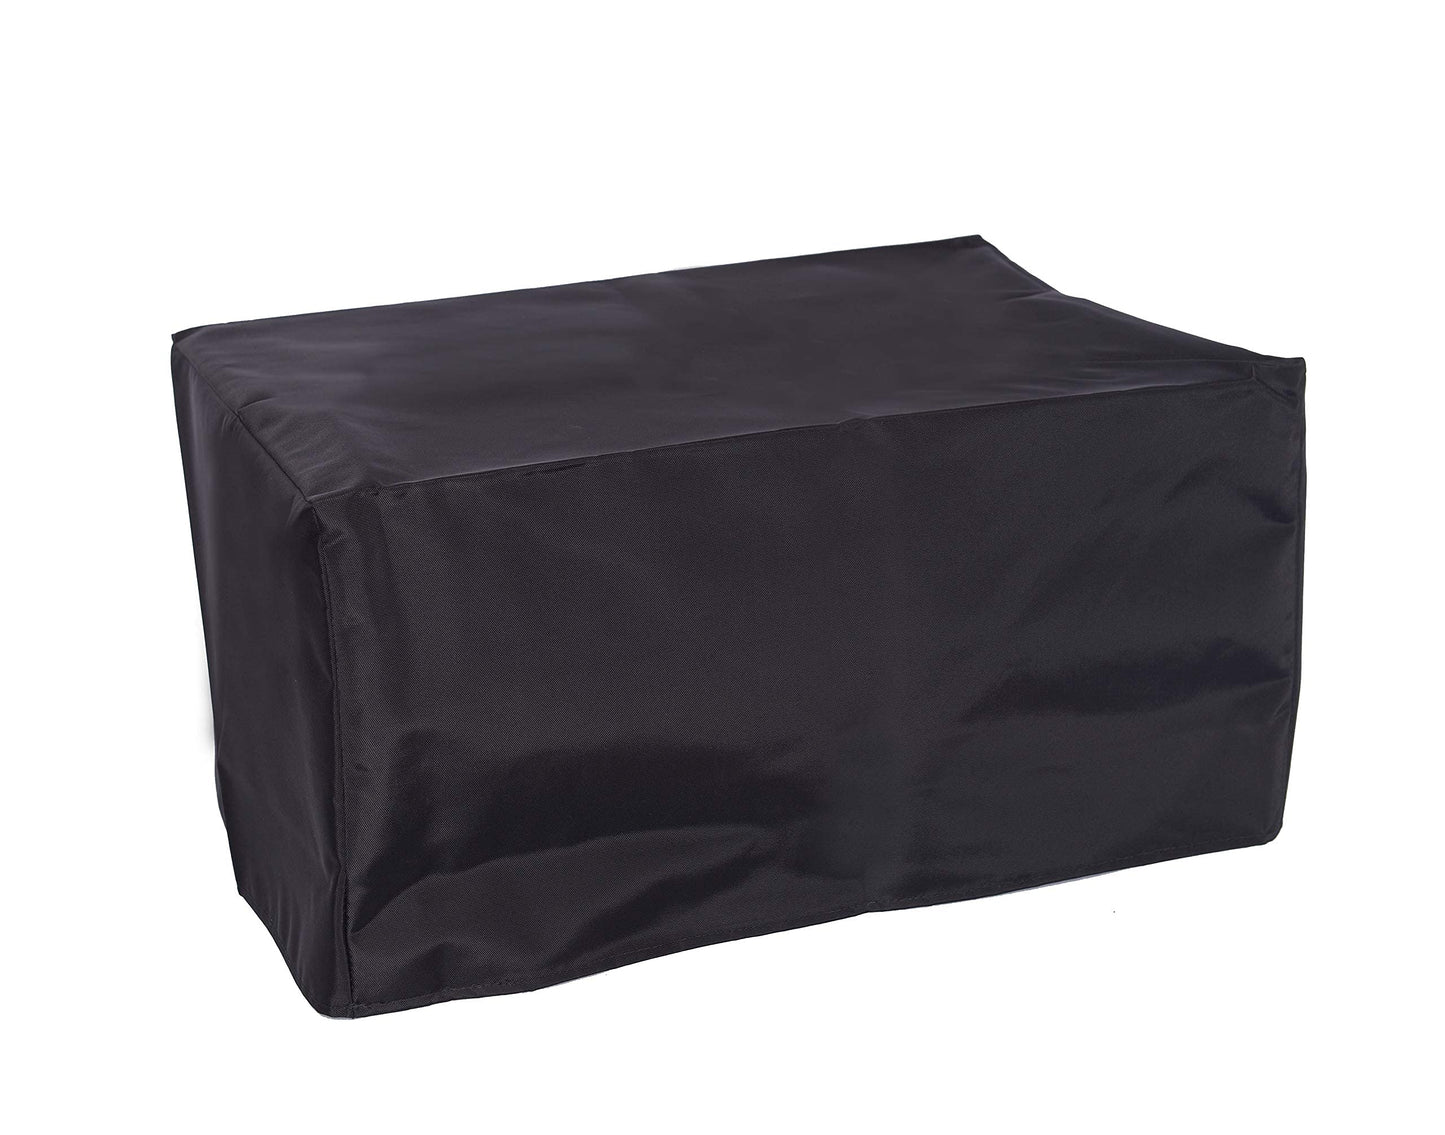 The Perfect Dust Cover, Black Nylon Cover for Canon ImageCLASS MF242w Black and White Laser Printer, Anti Static, Double-Stitched and Waterproof Dust Cover by The Perfect Dust Cover LLC